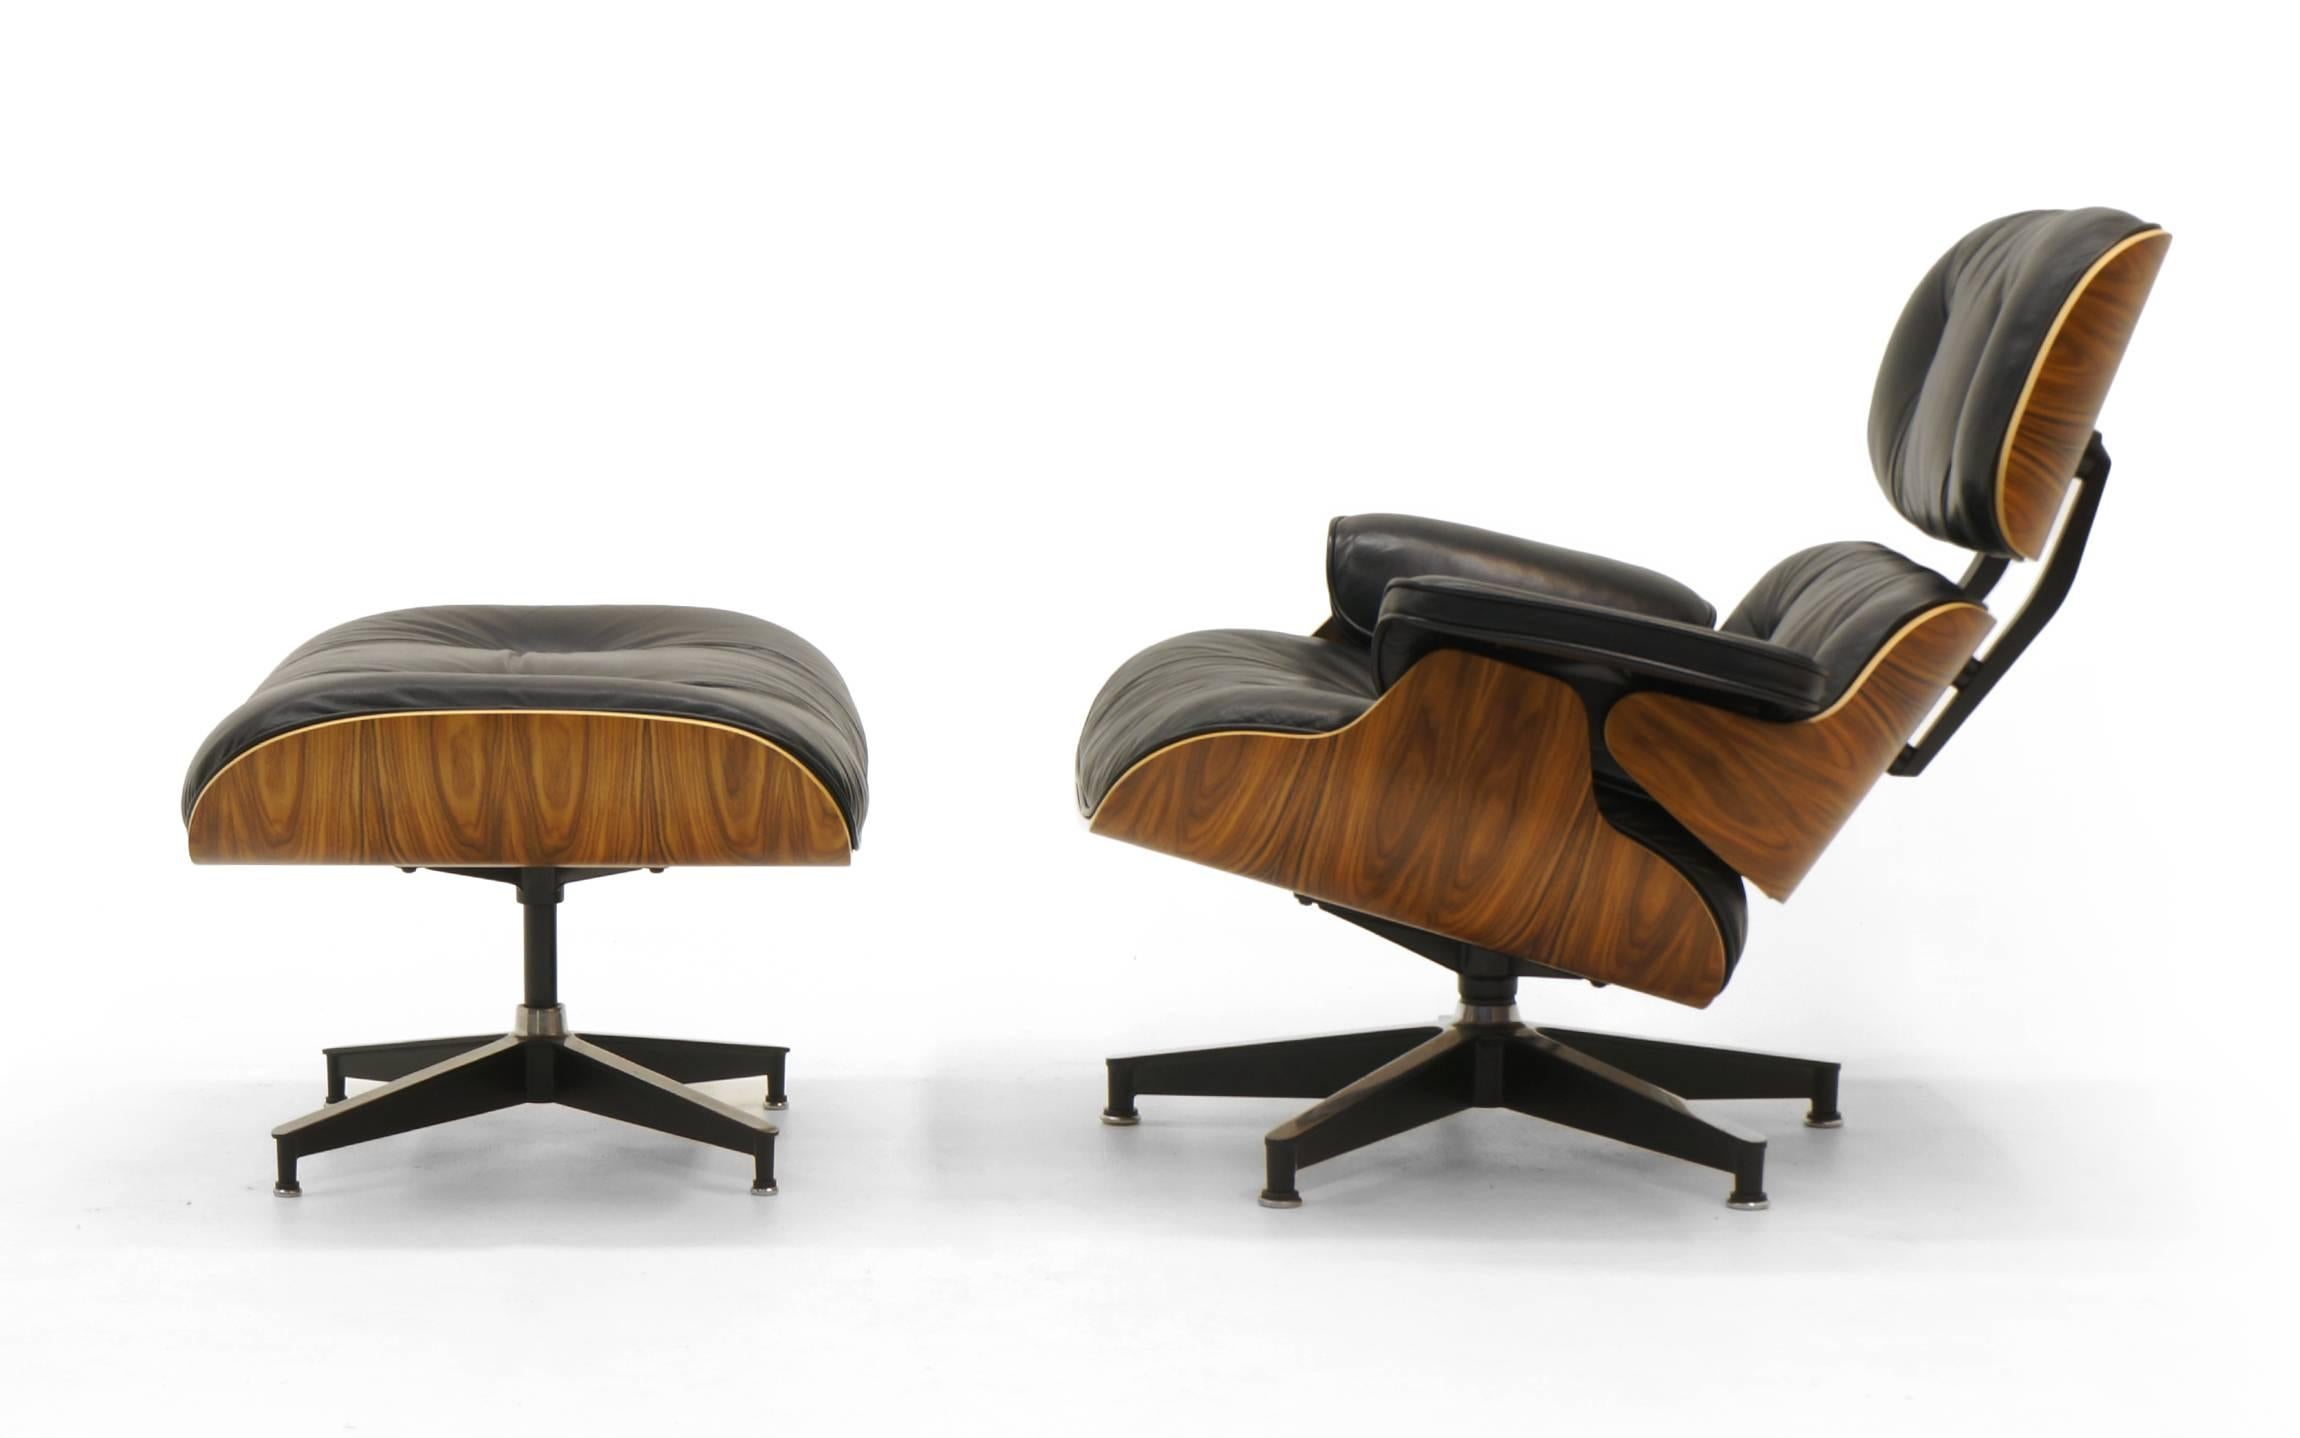 Rare and collectable Charles and Ray Eames 670 and 671 lounge chair and ottoman. To commemorate the 50th anniversary (1956-2006) of the design of the set, Herman Miller introduced the chair in Santos Palisander. This is a signed example from that